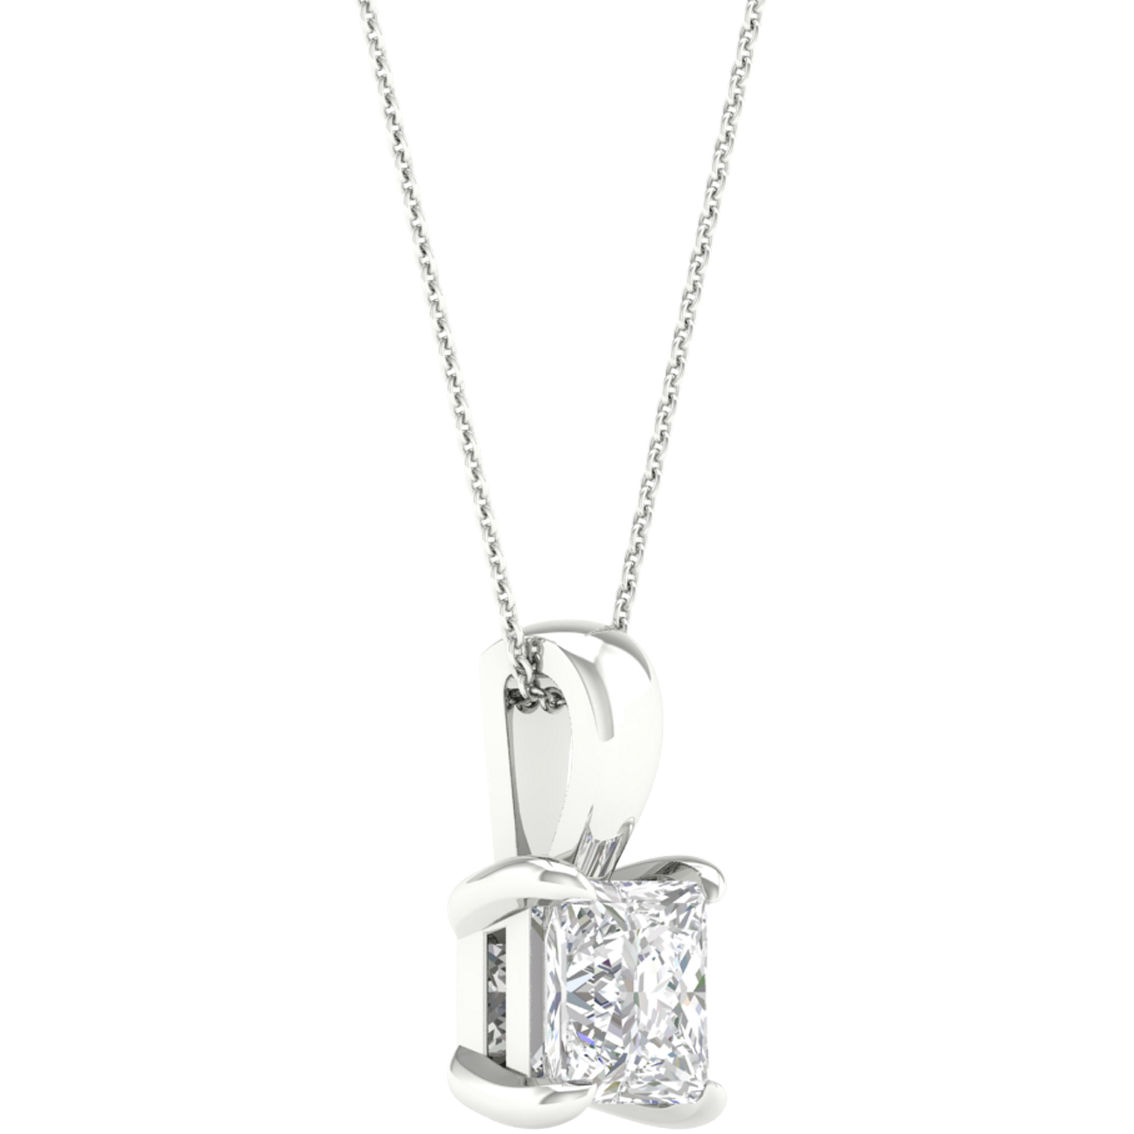 Pure Brilliance 14K White Gold 1 CTW Solitaire Pendant with IGI Certification - Image 2 of 2